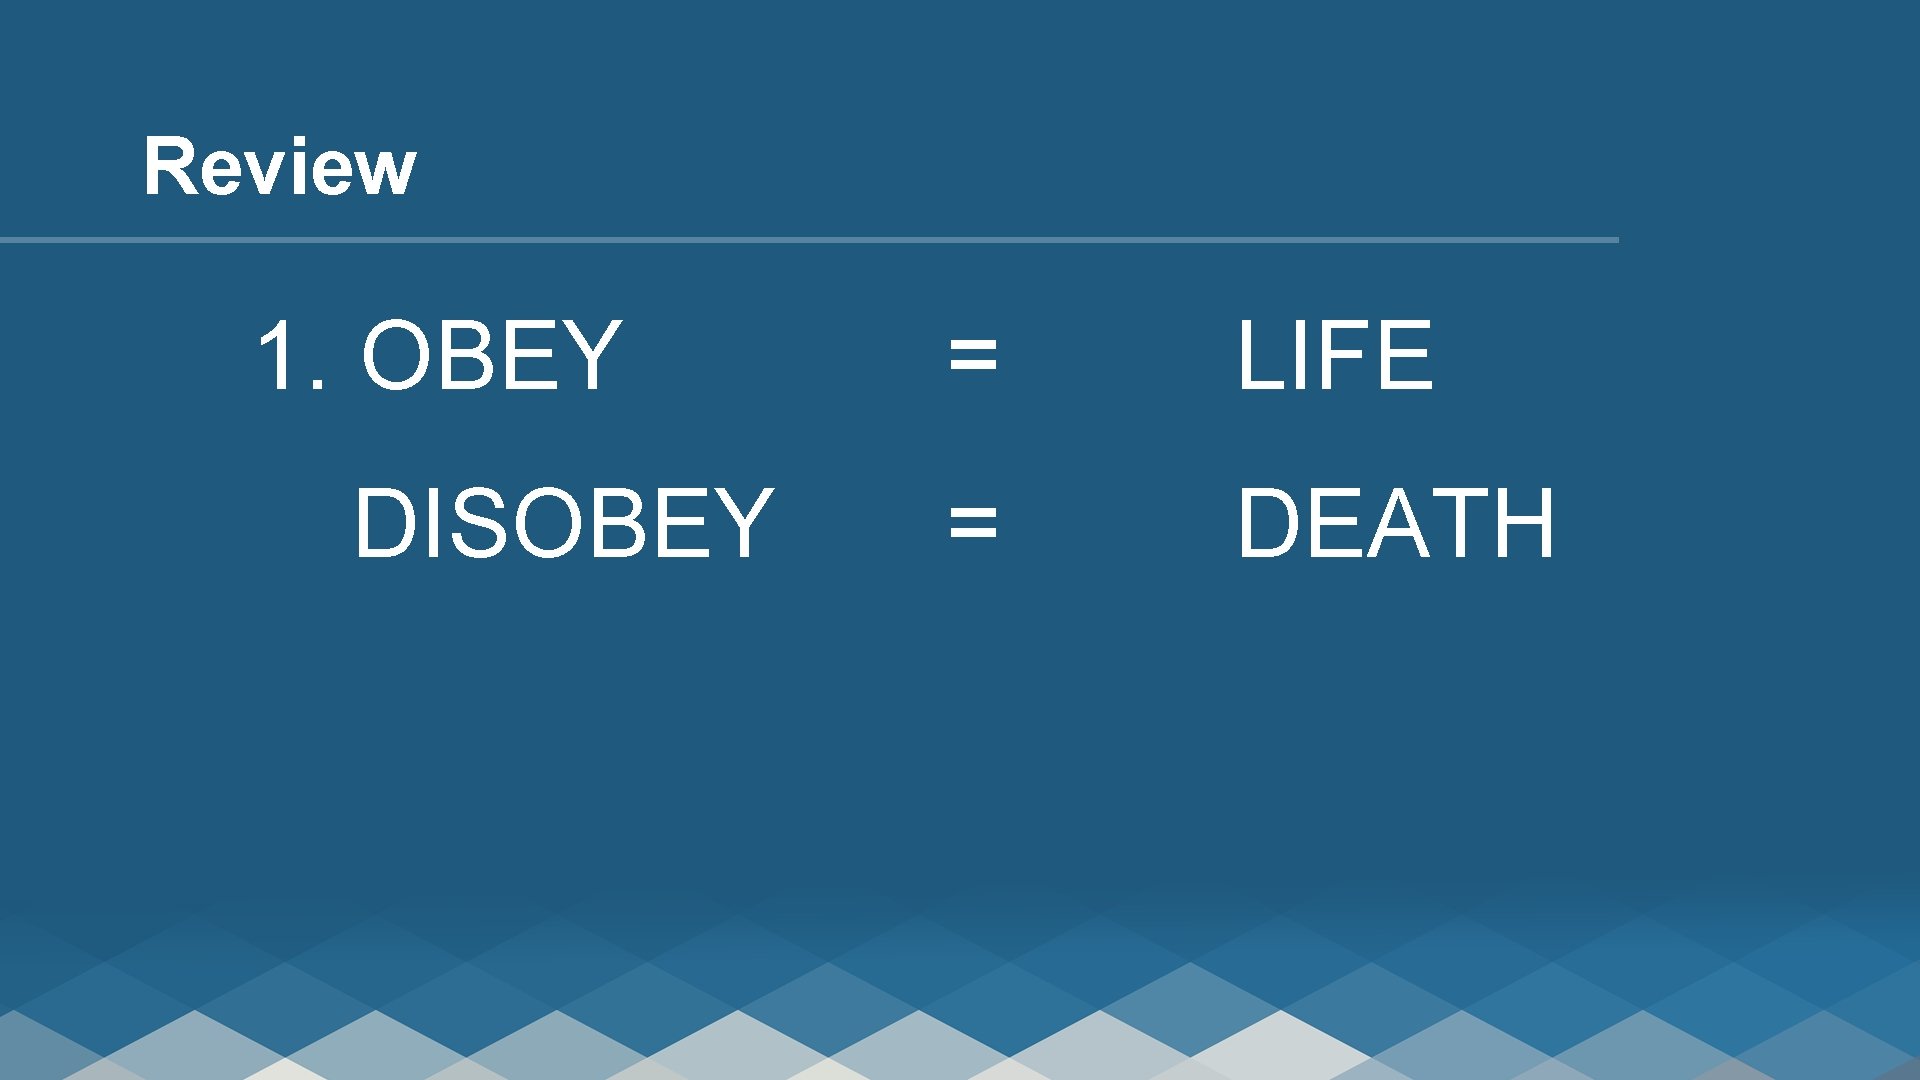 Review 1. OBEY DISOBEY = LIFE = DEATH 